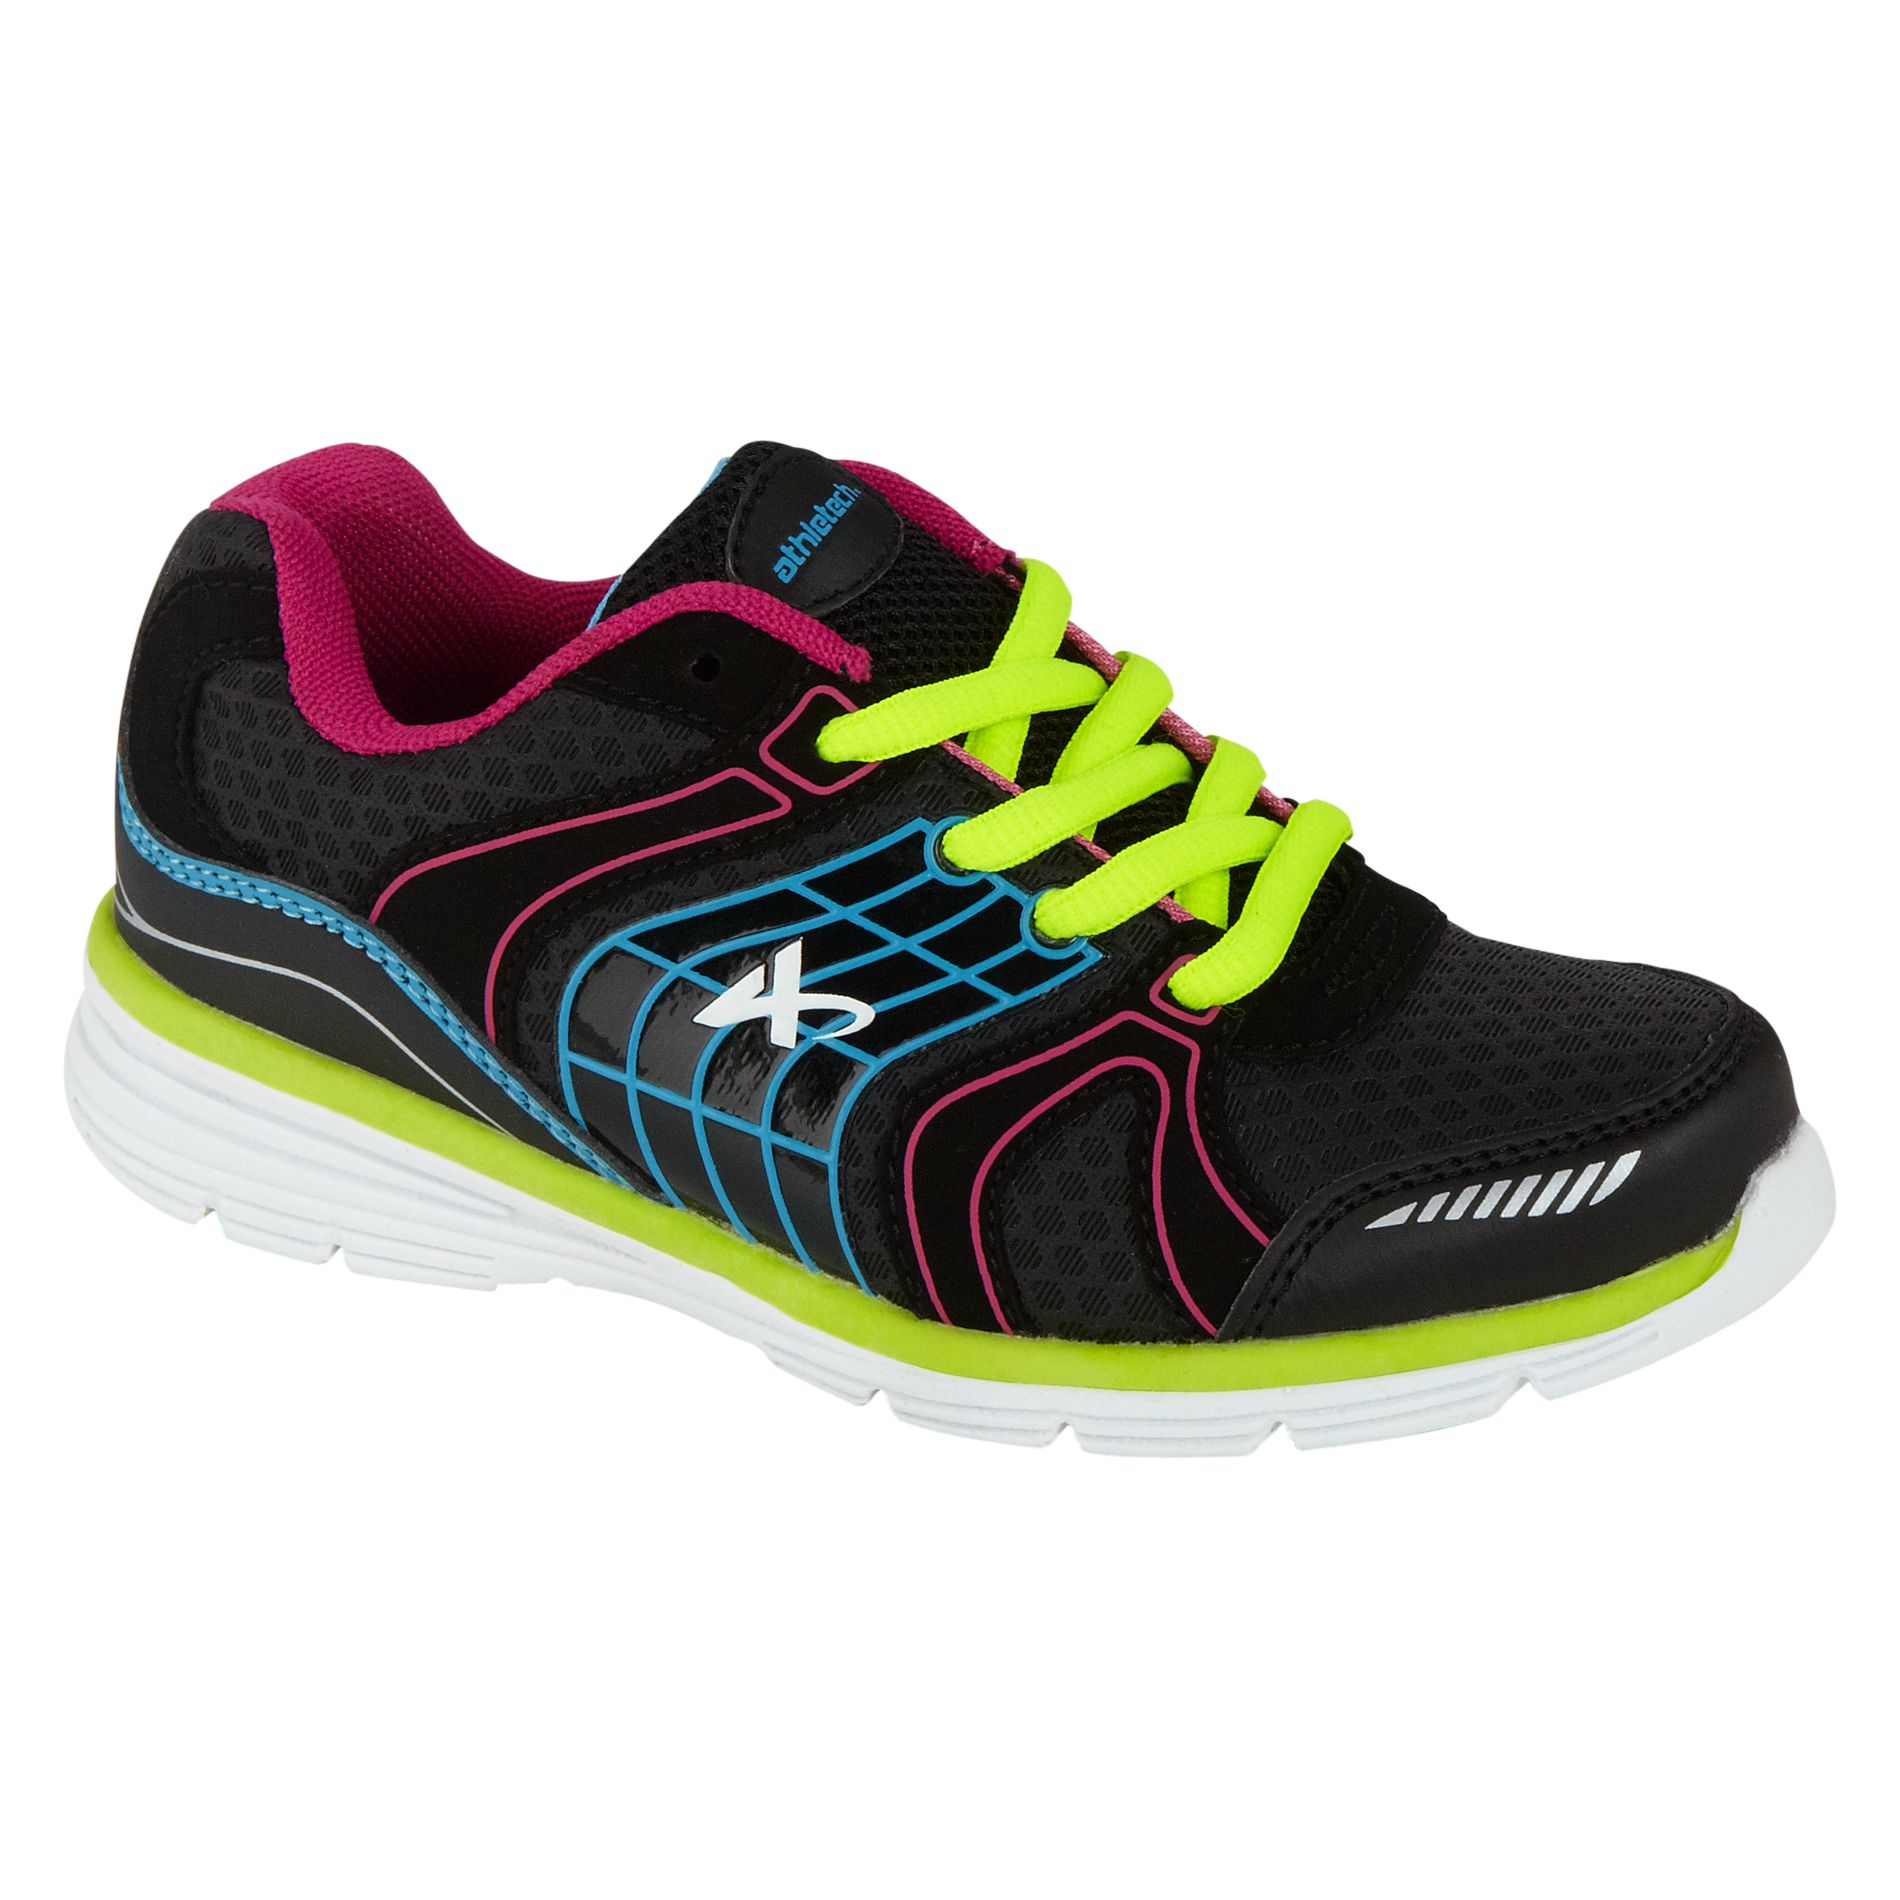 Athletech Girl's Ath L-Willow2 Athletic Shoe - Black